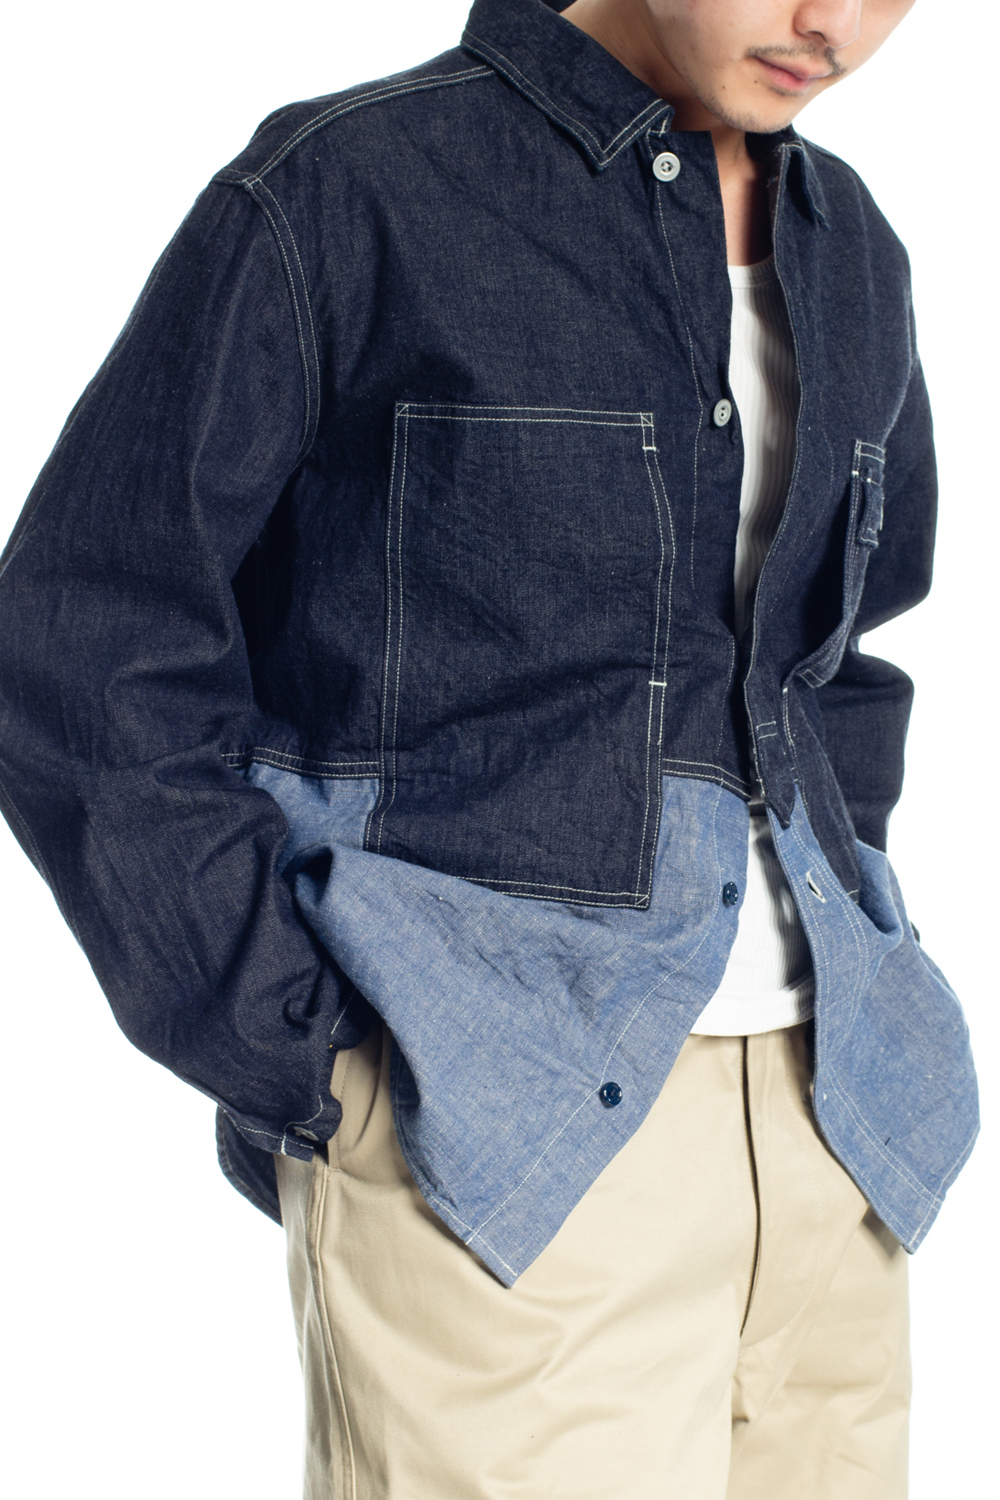 New Arrival : Nigel Cabourn